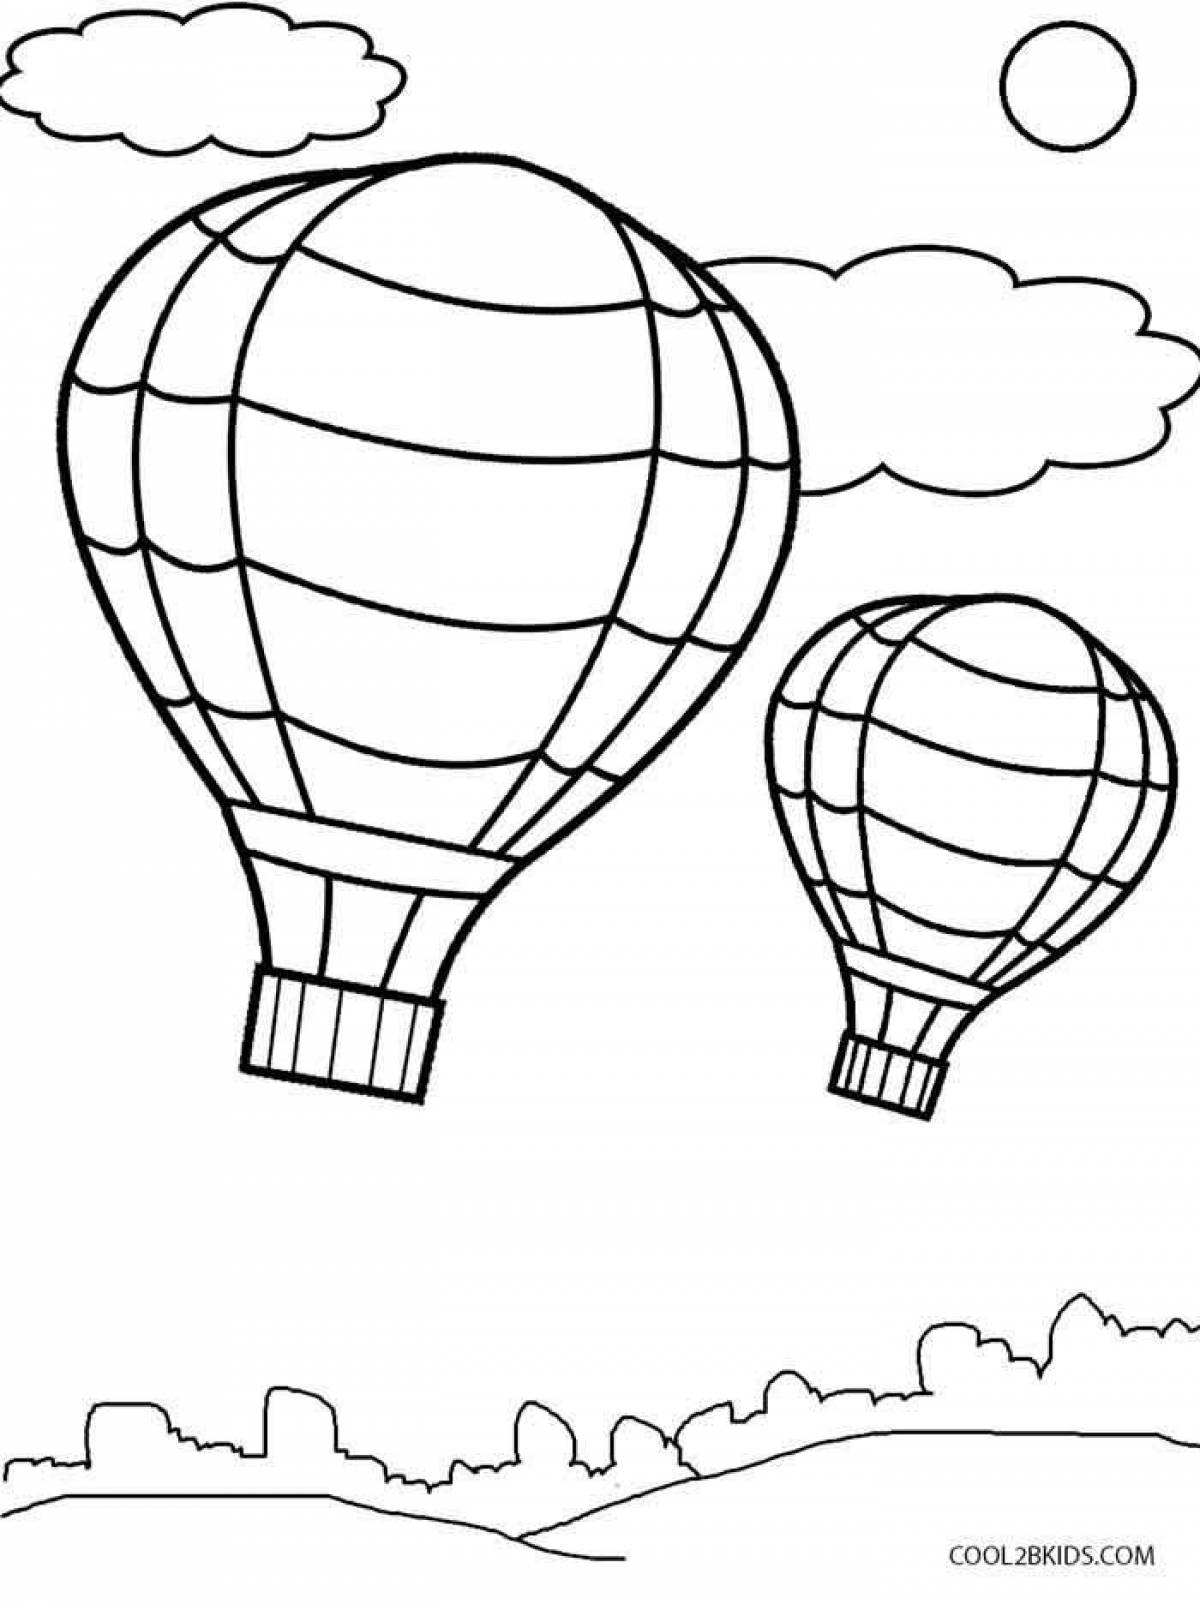 Fun coloring book with balloons